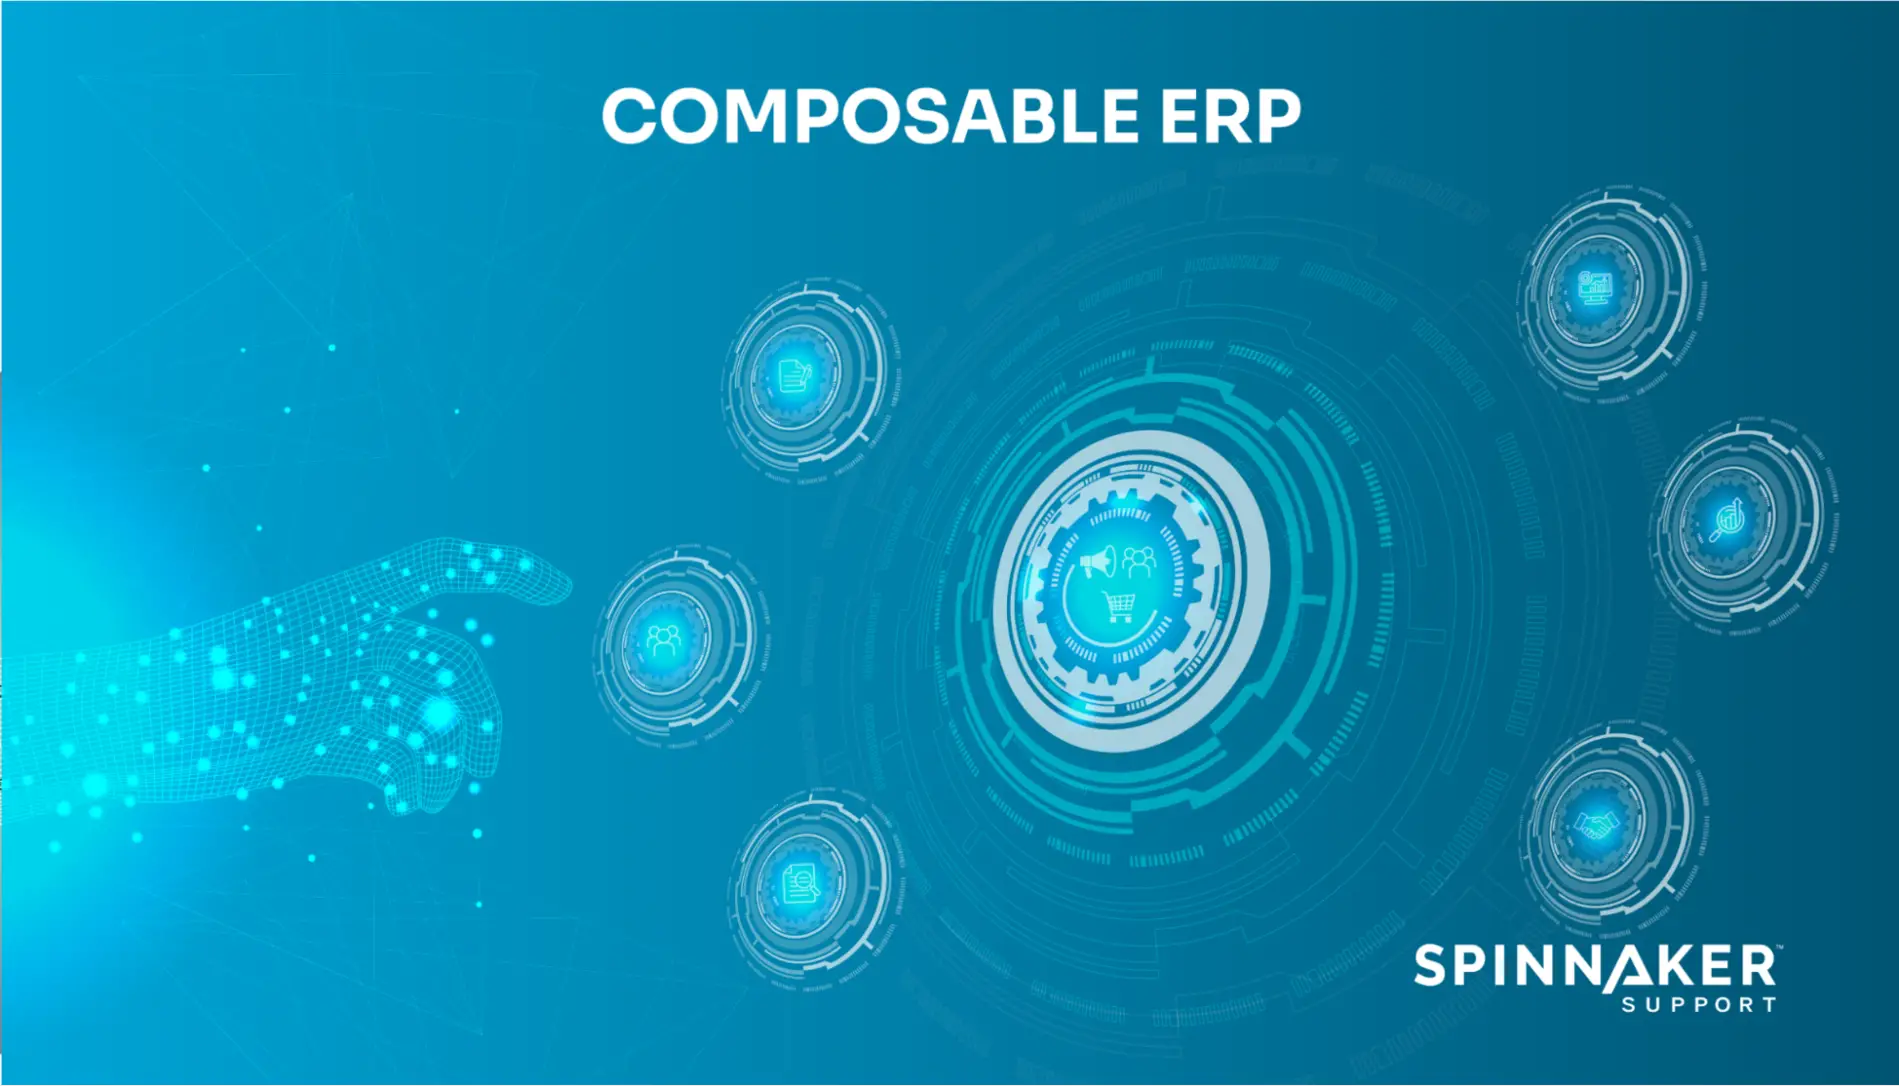 What is composable ERP